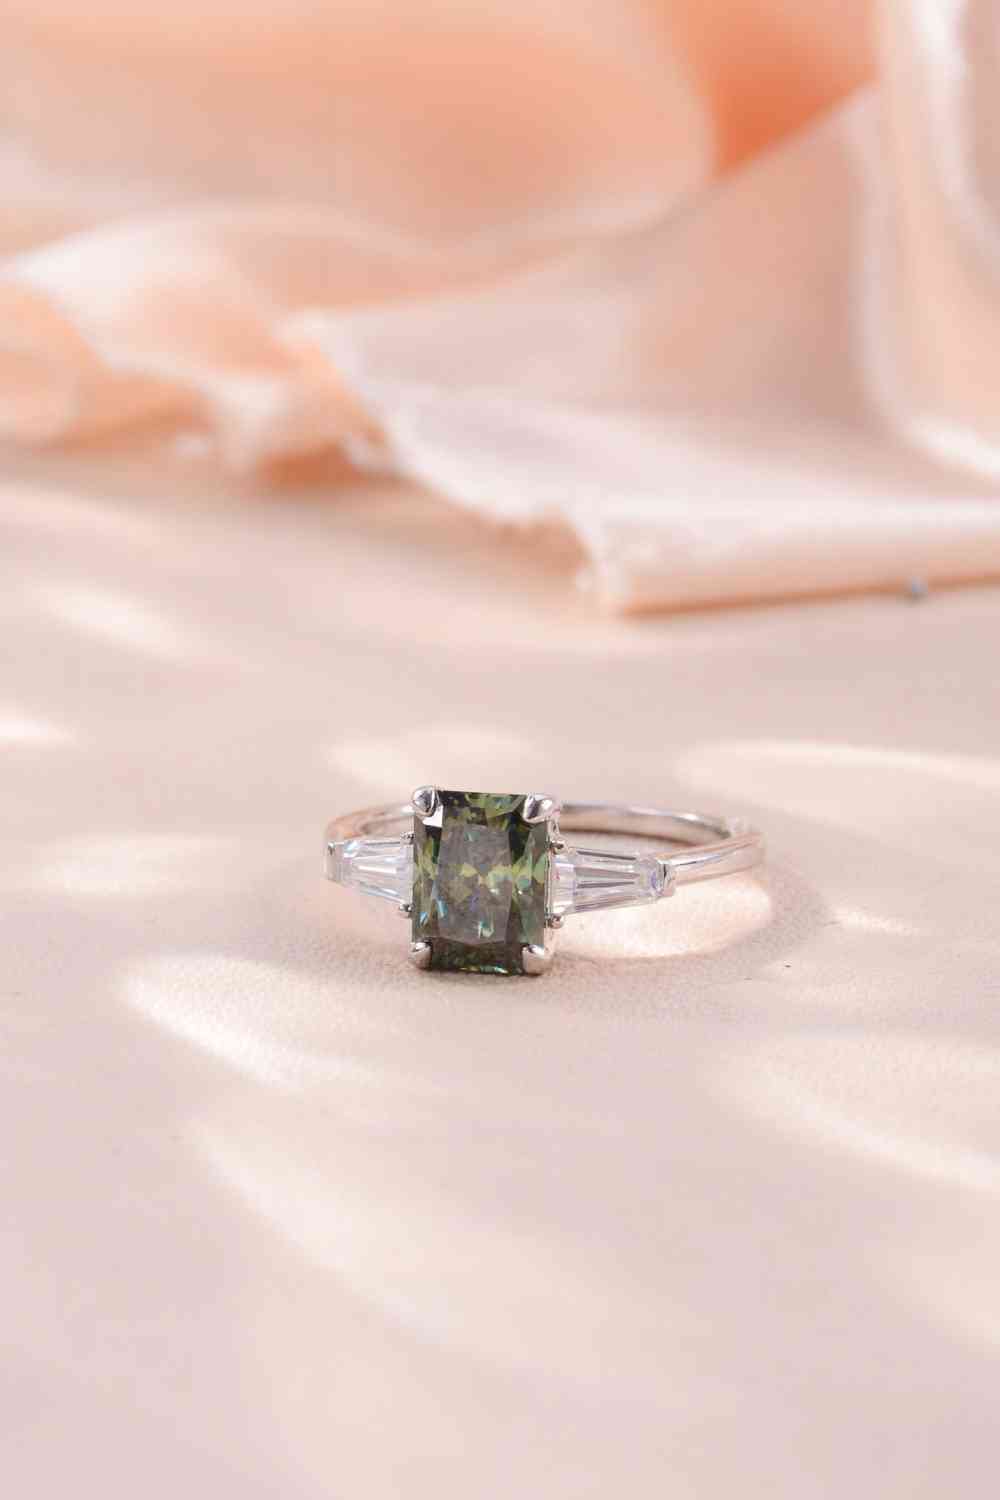 a ring with a green diamond on top of it